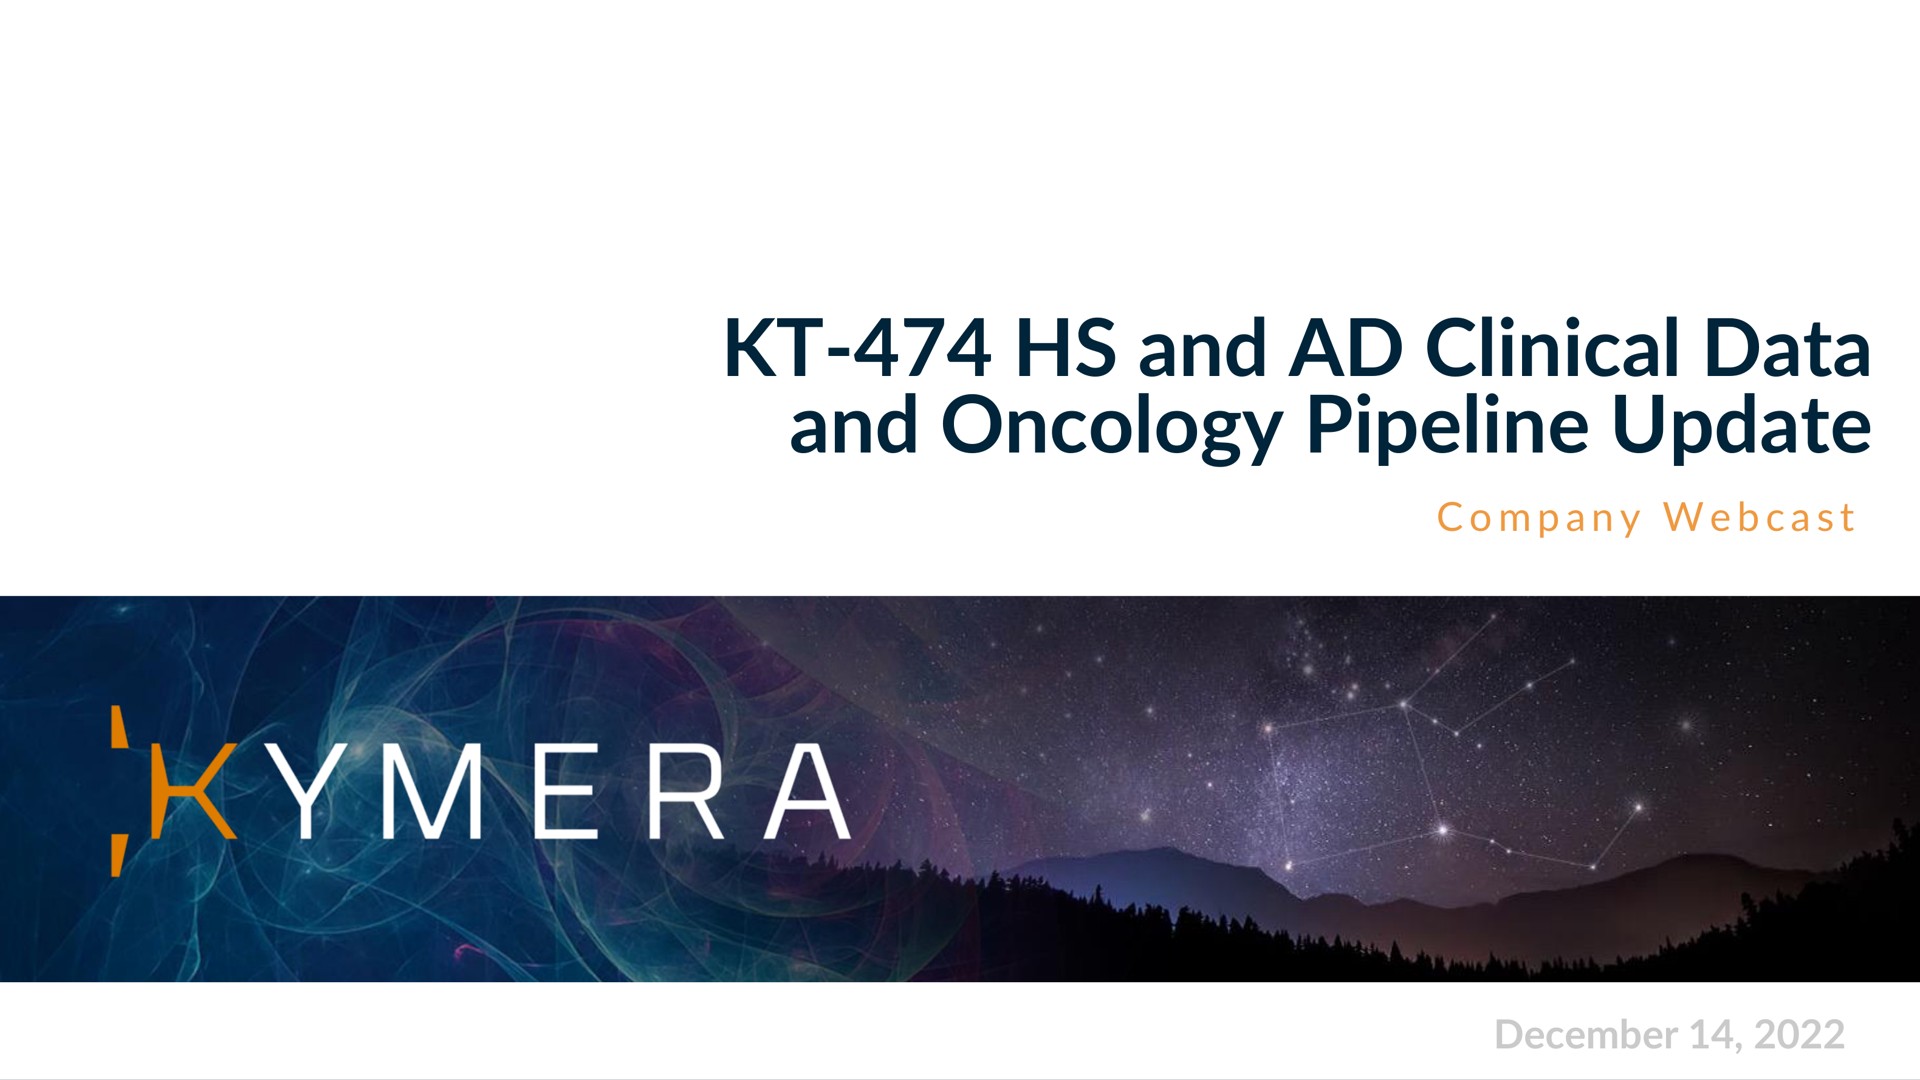 and clinical data and oncology pipeline update | Kymera